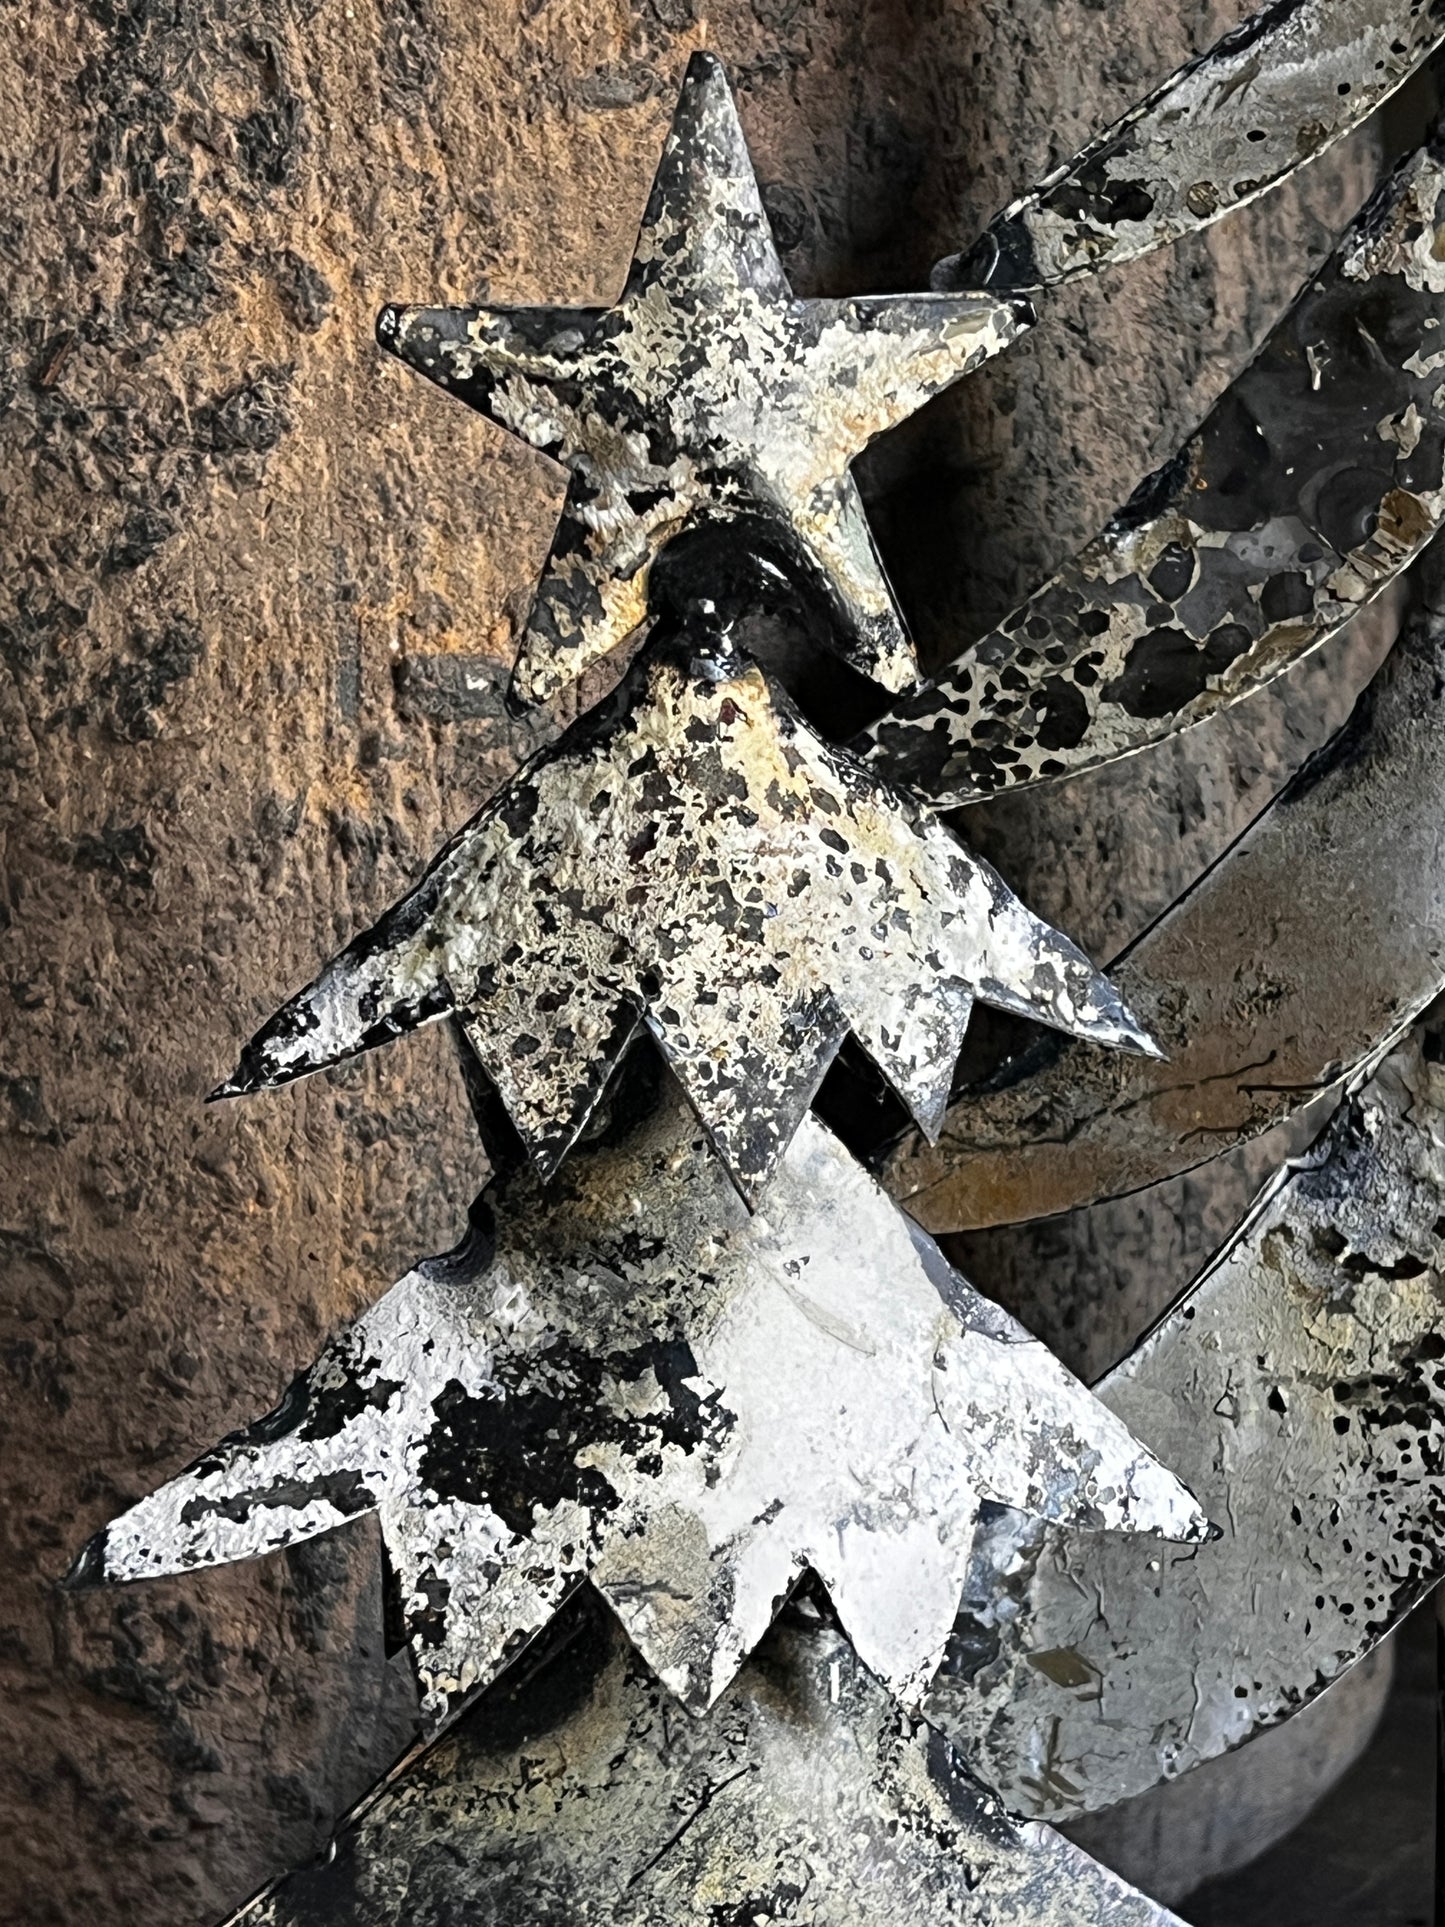 Metal Christmas tree, available in S and M